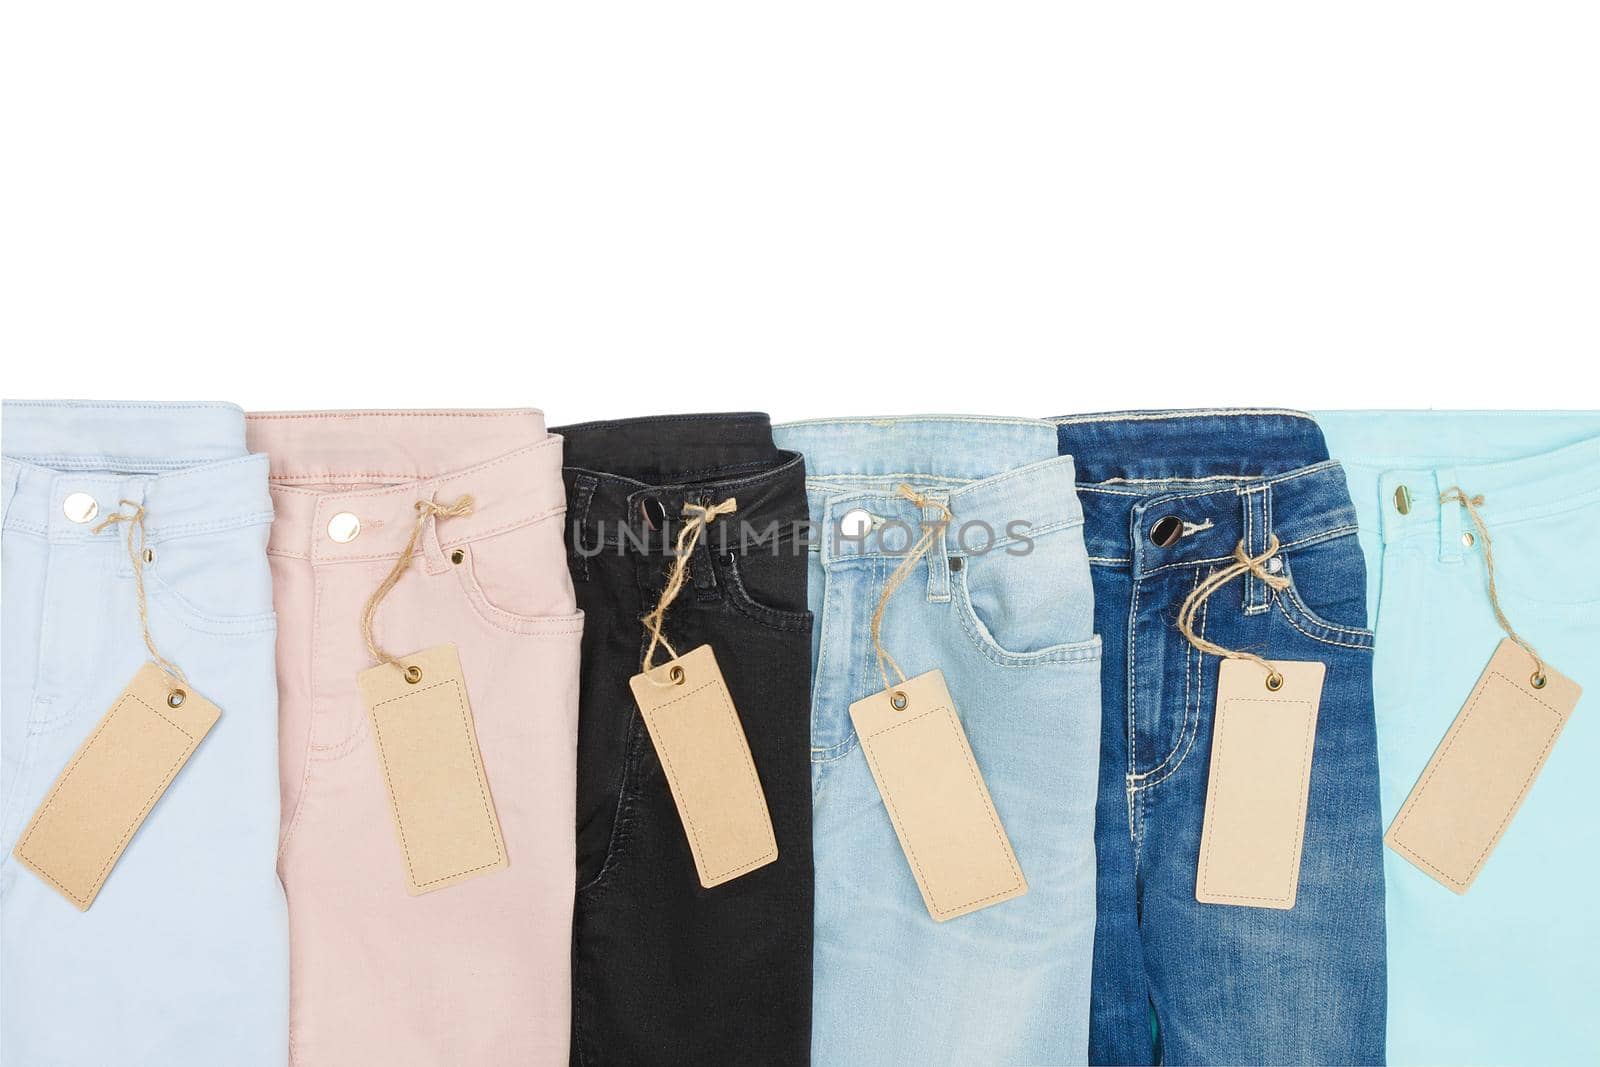 Set of multicolored jeans lined with each other in a row